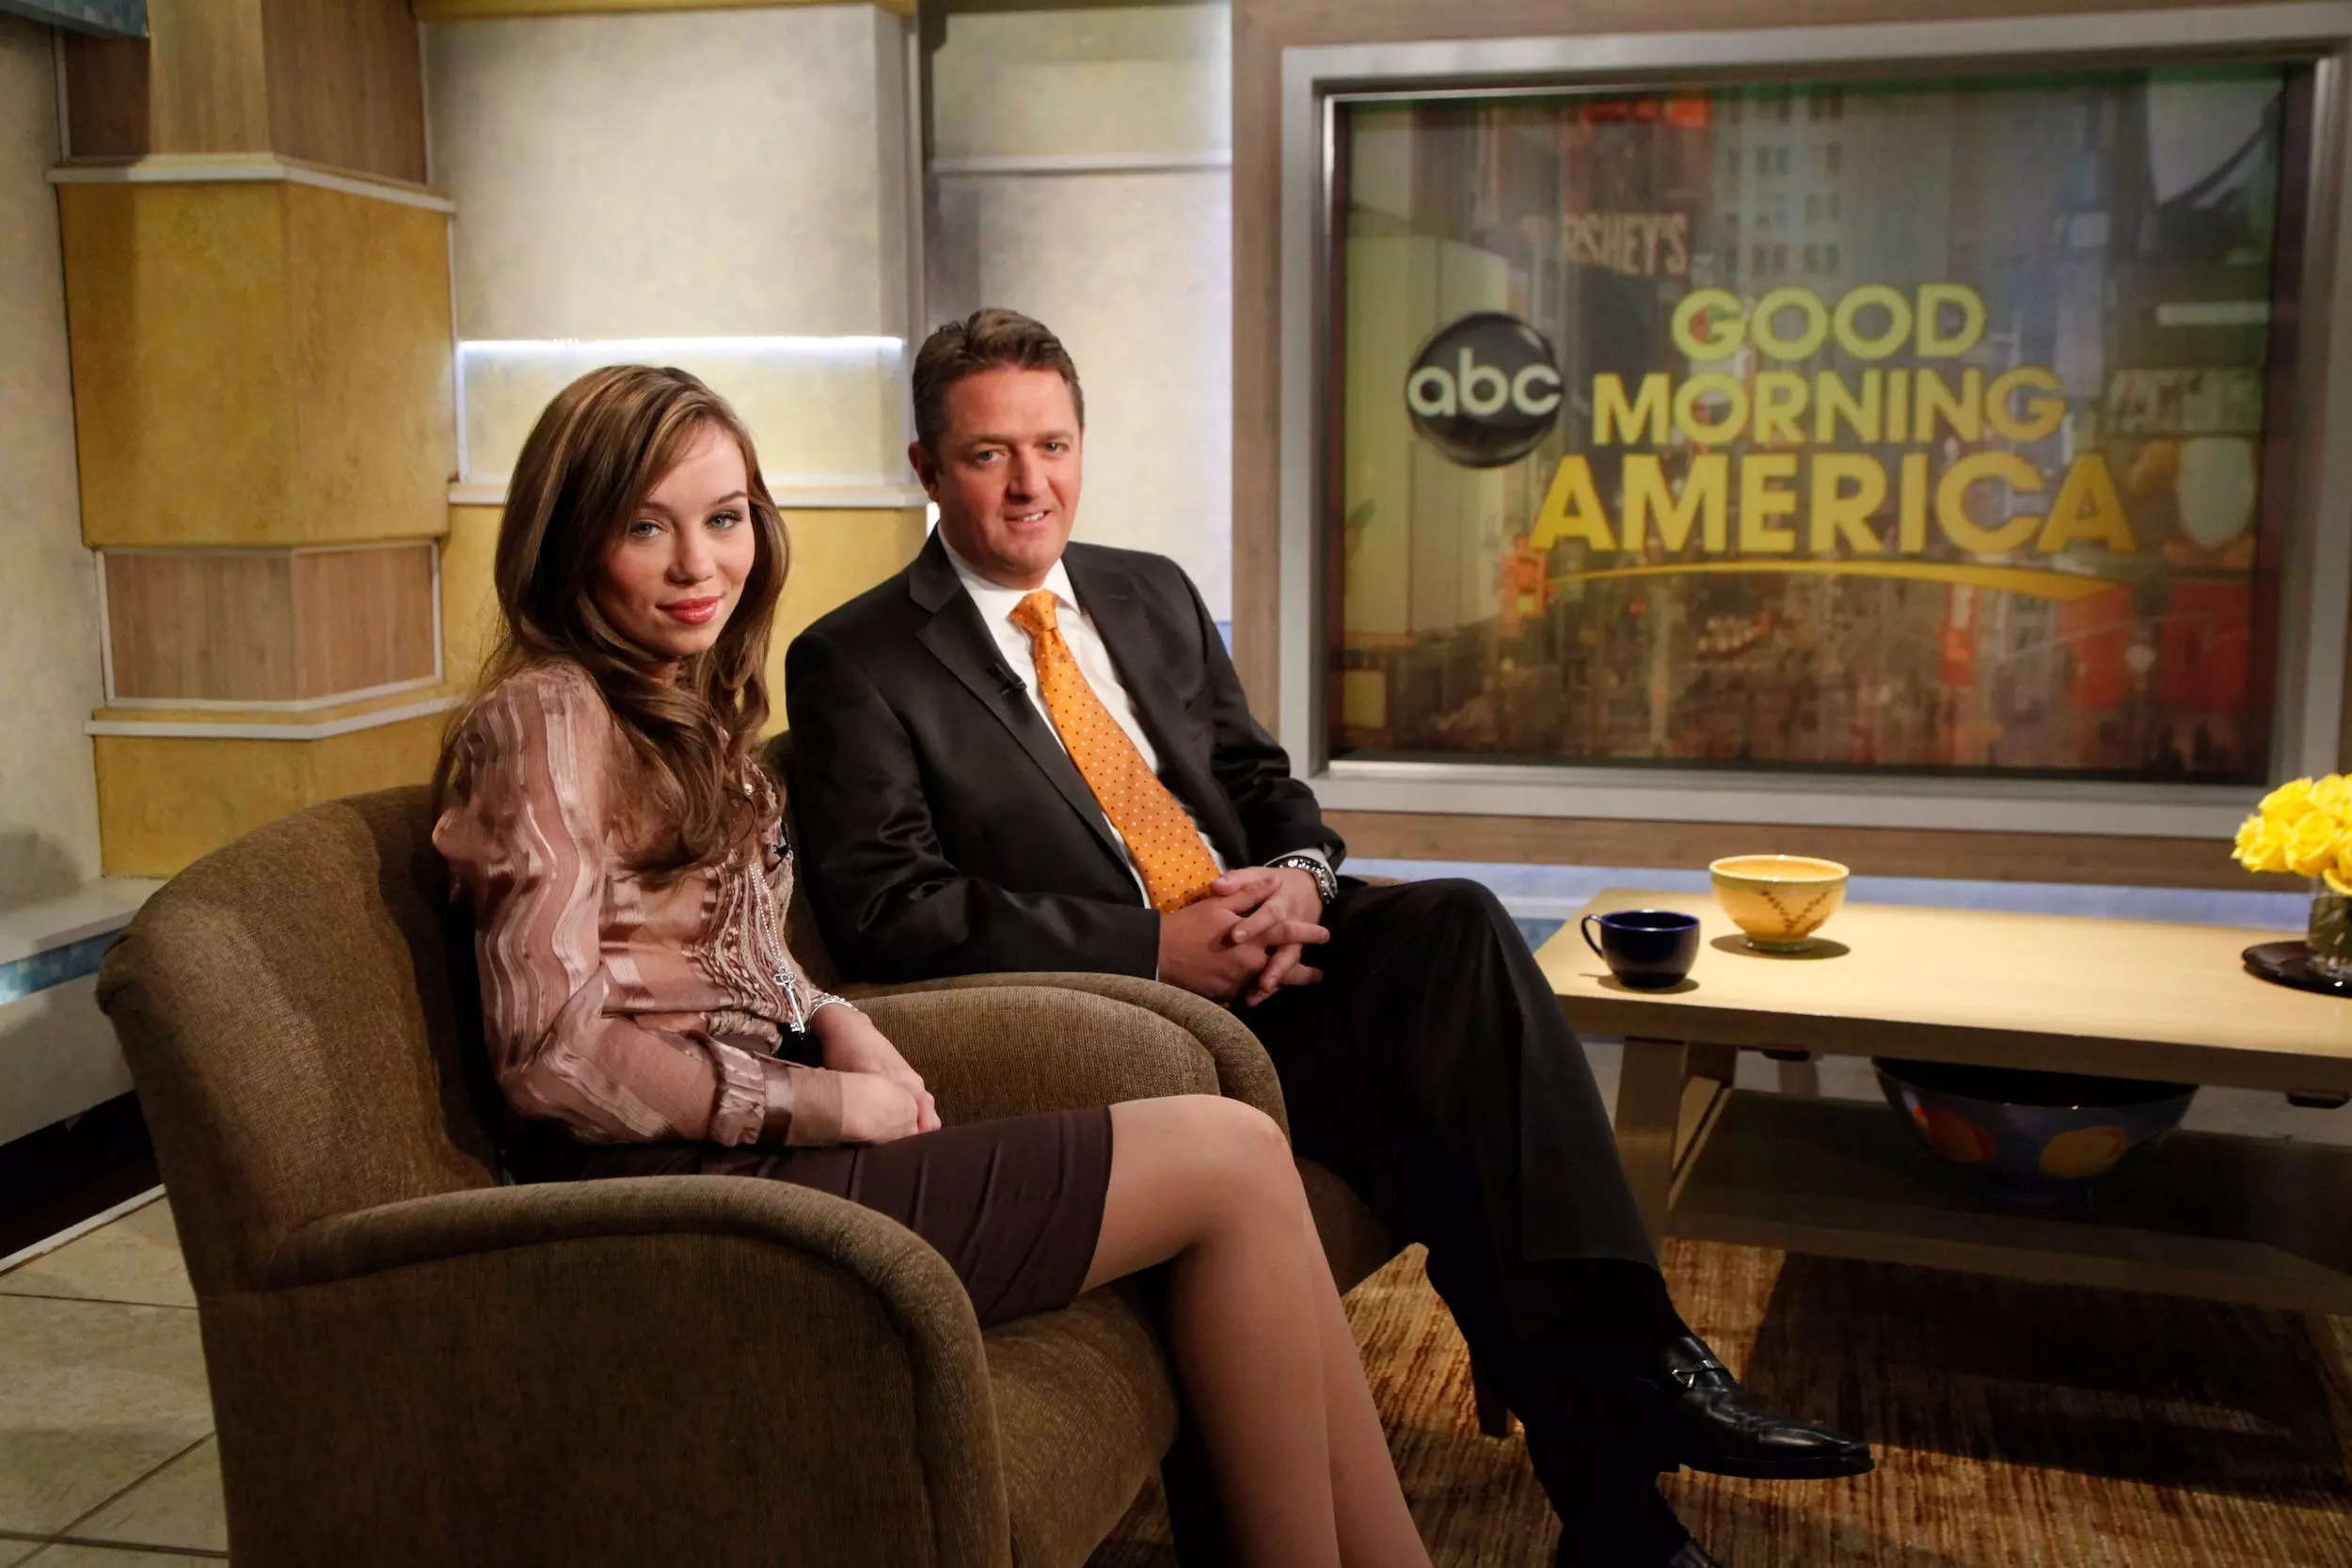 Capri Anderson and Keith Davidson on the set of Good Morning America in 2010.